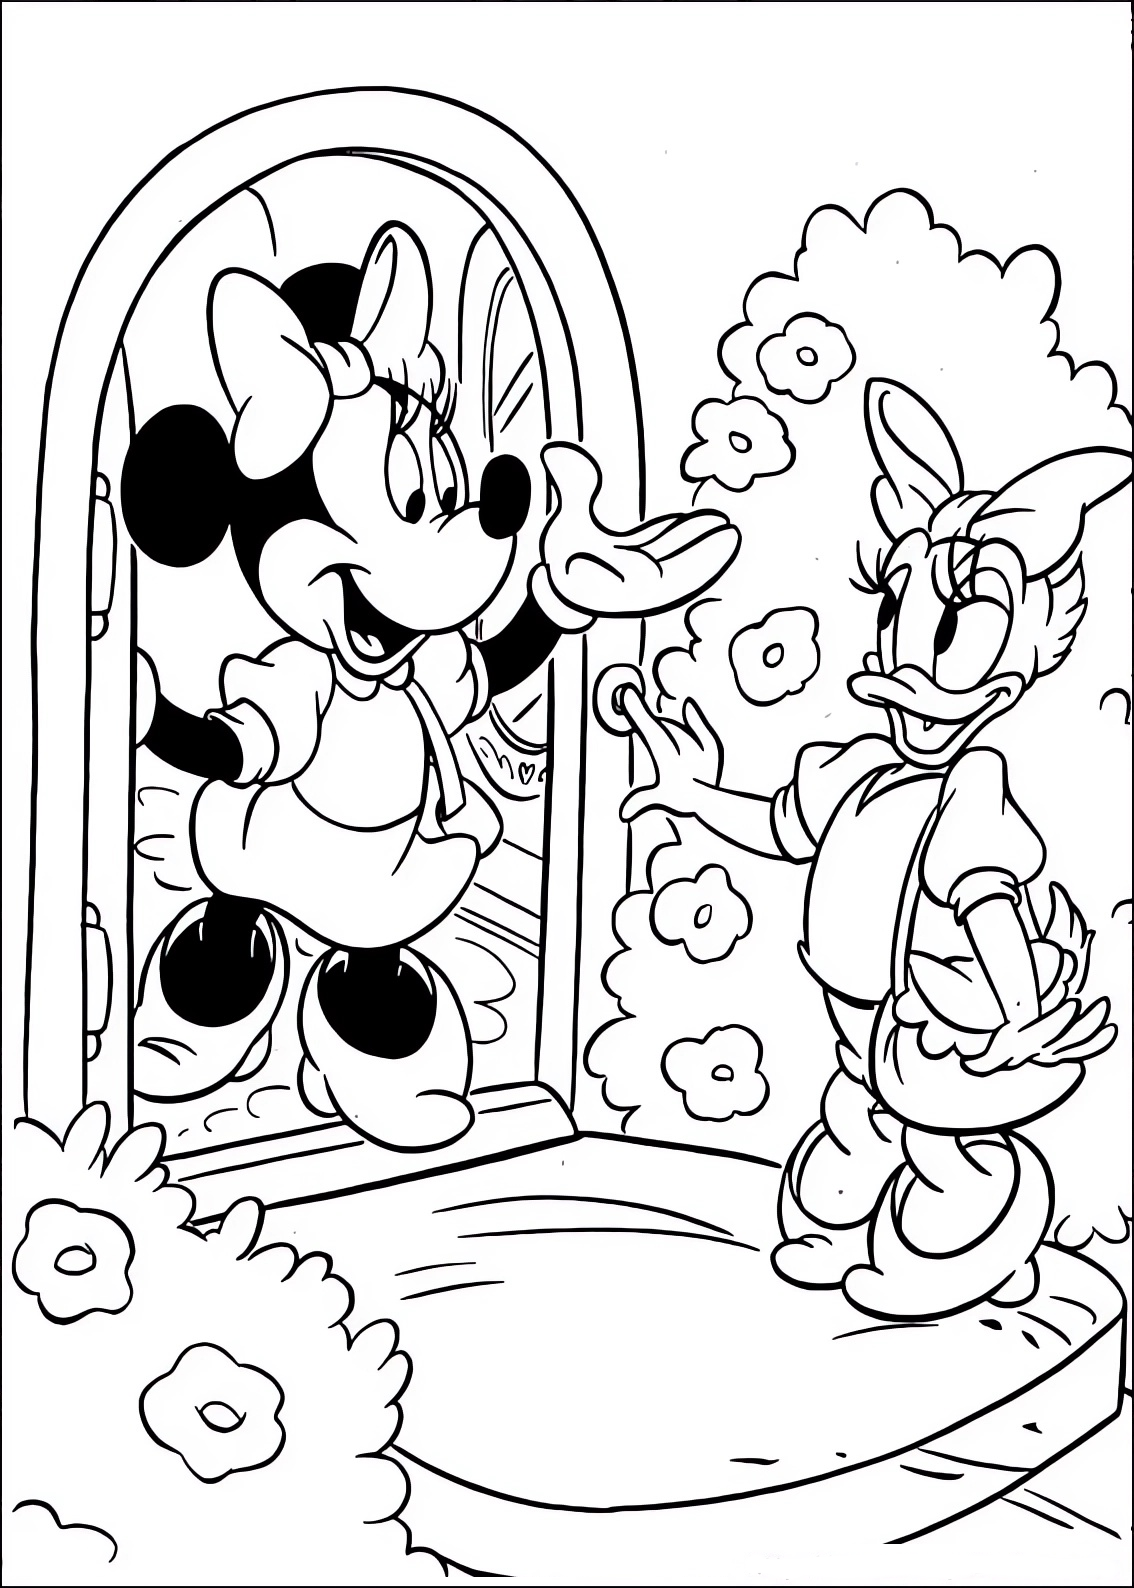 Coloring page of Minnie Mouse and Daisy Duck